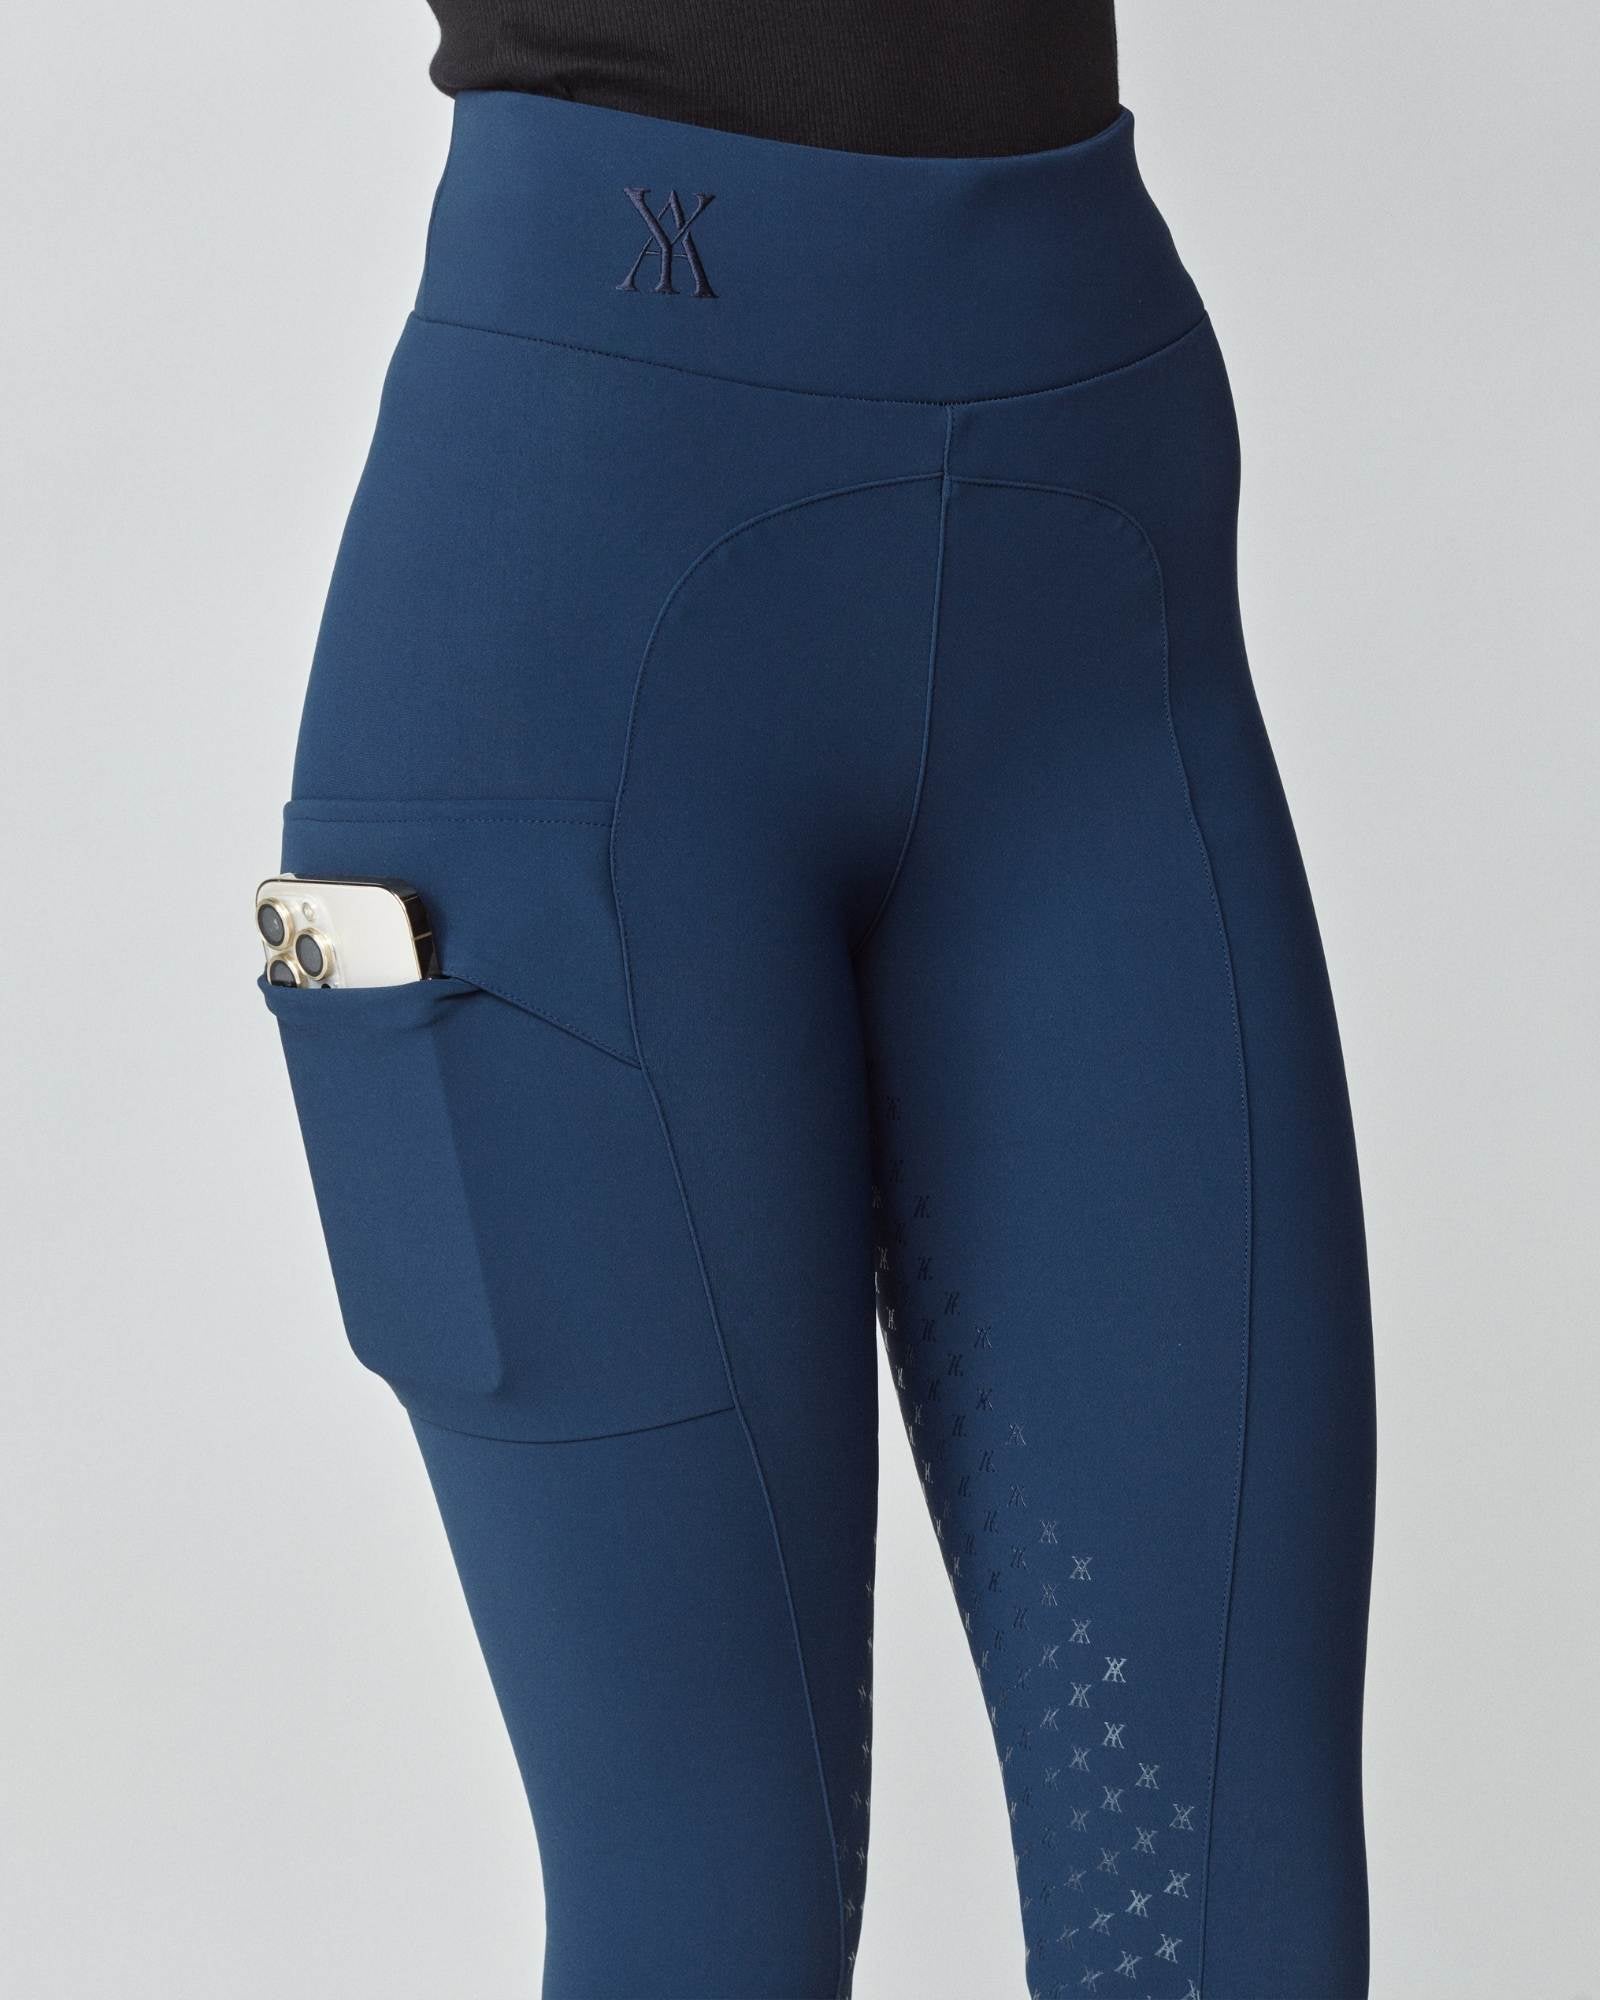 Compression pull-on Riding Breeches Navy